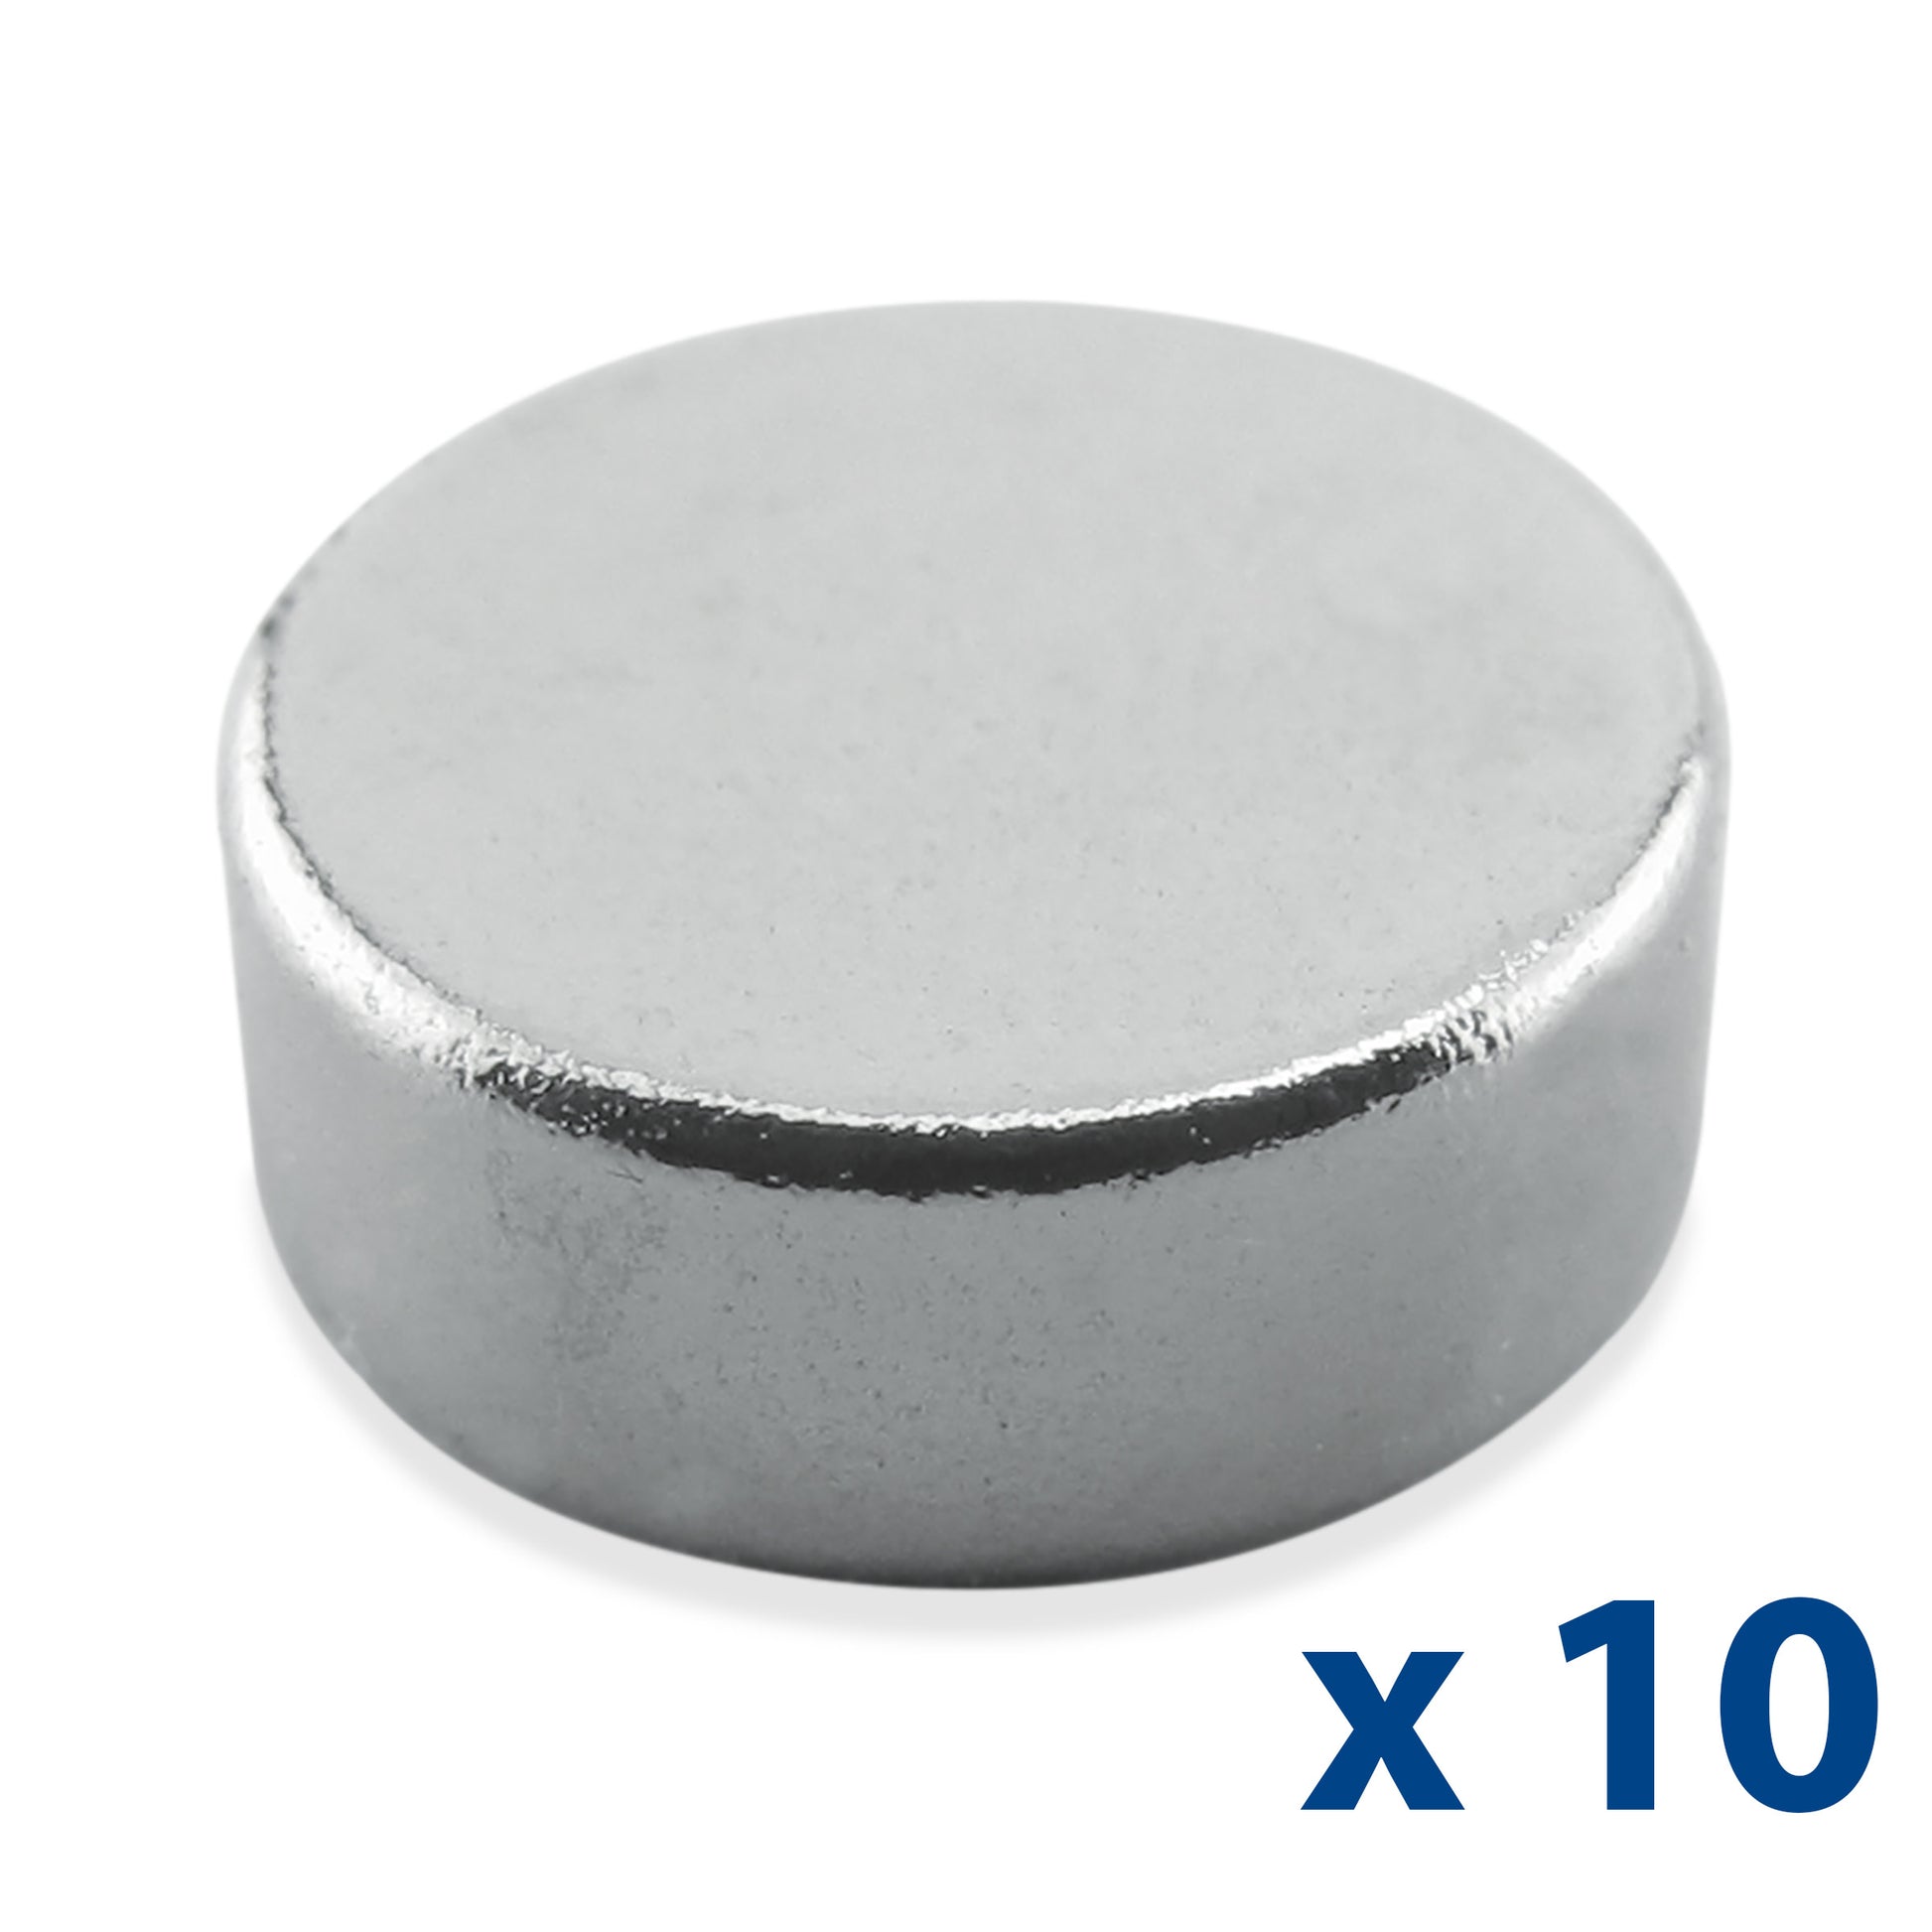 Load image into Gallery viewer, 07045 Neodymium Disc Magnets (10pk) - 45 Degree Angle View x 10